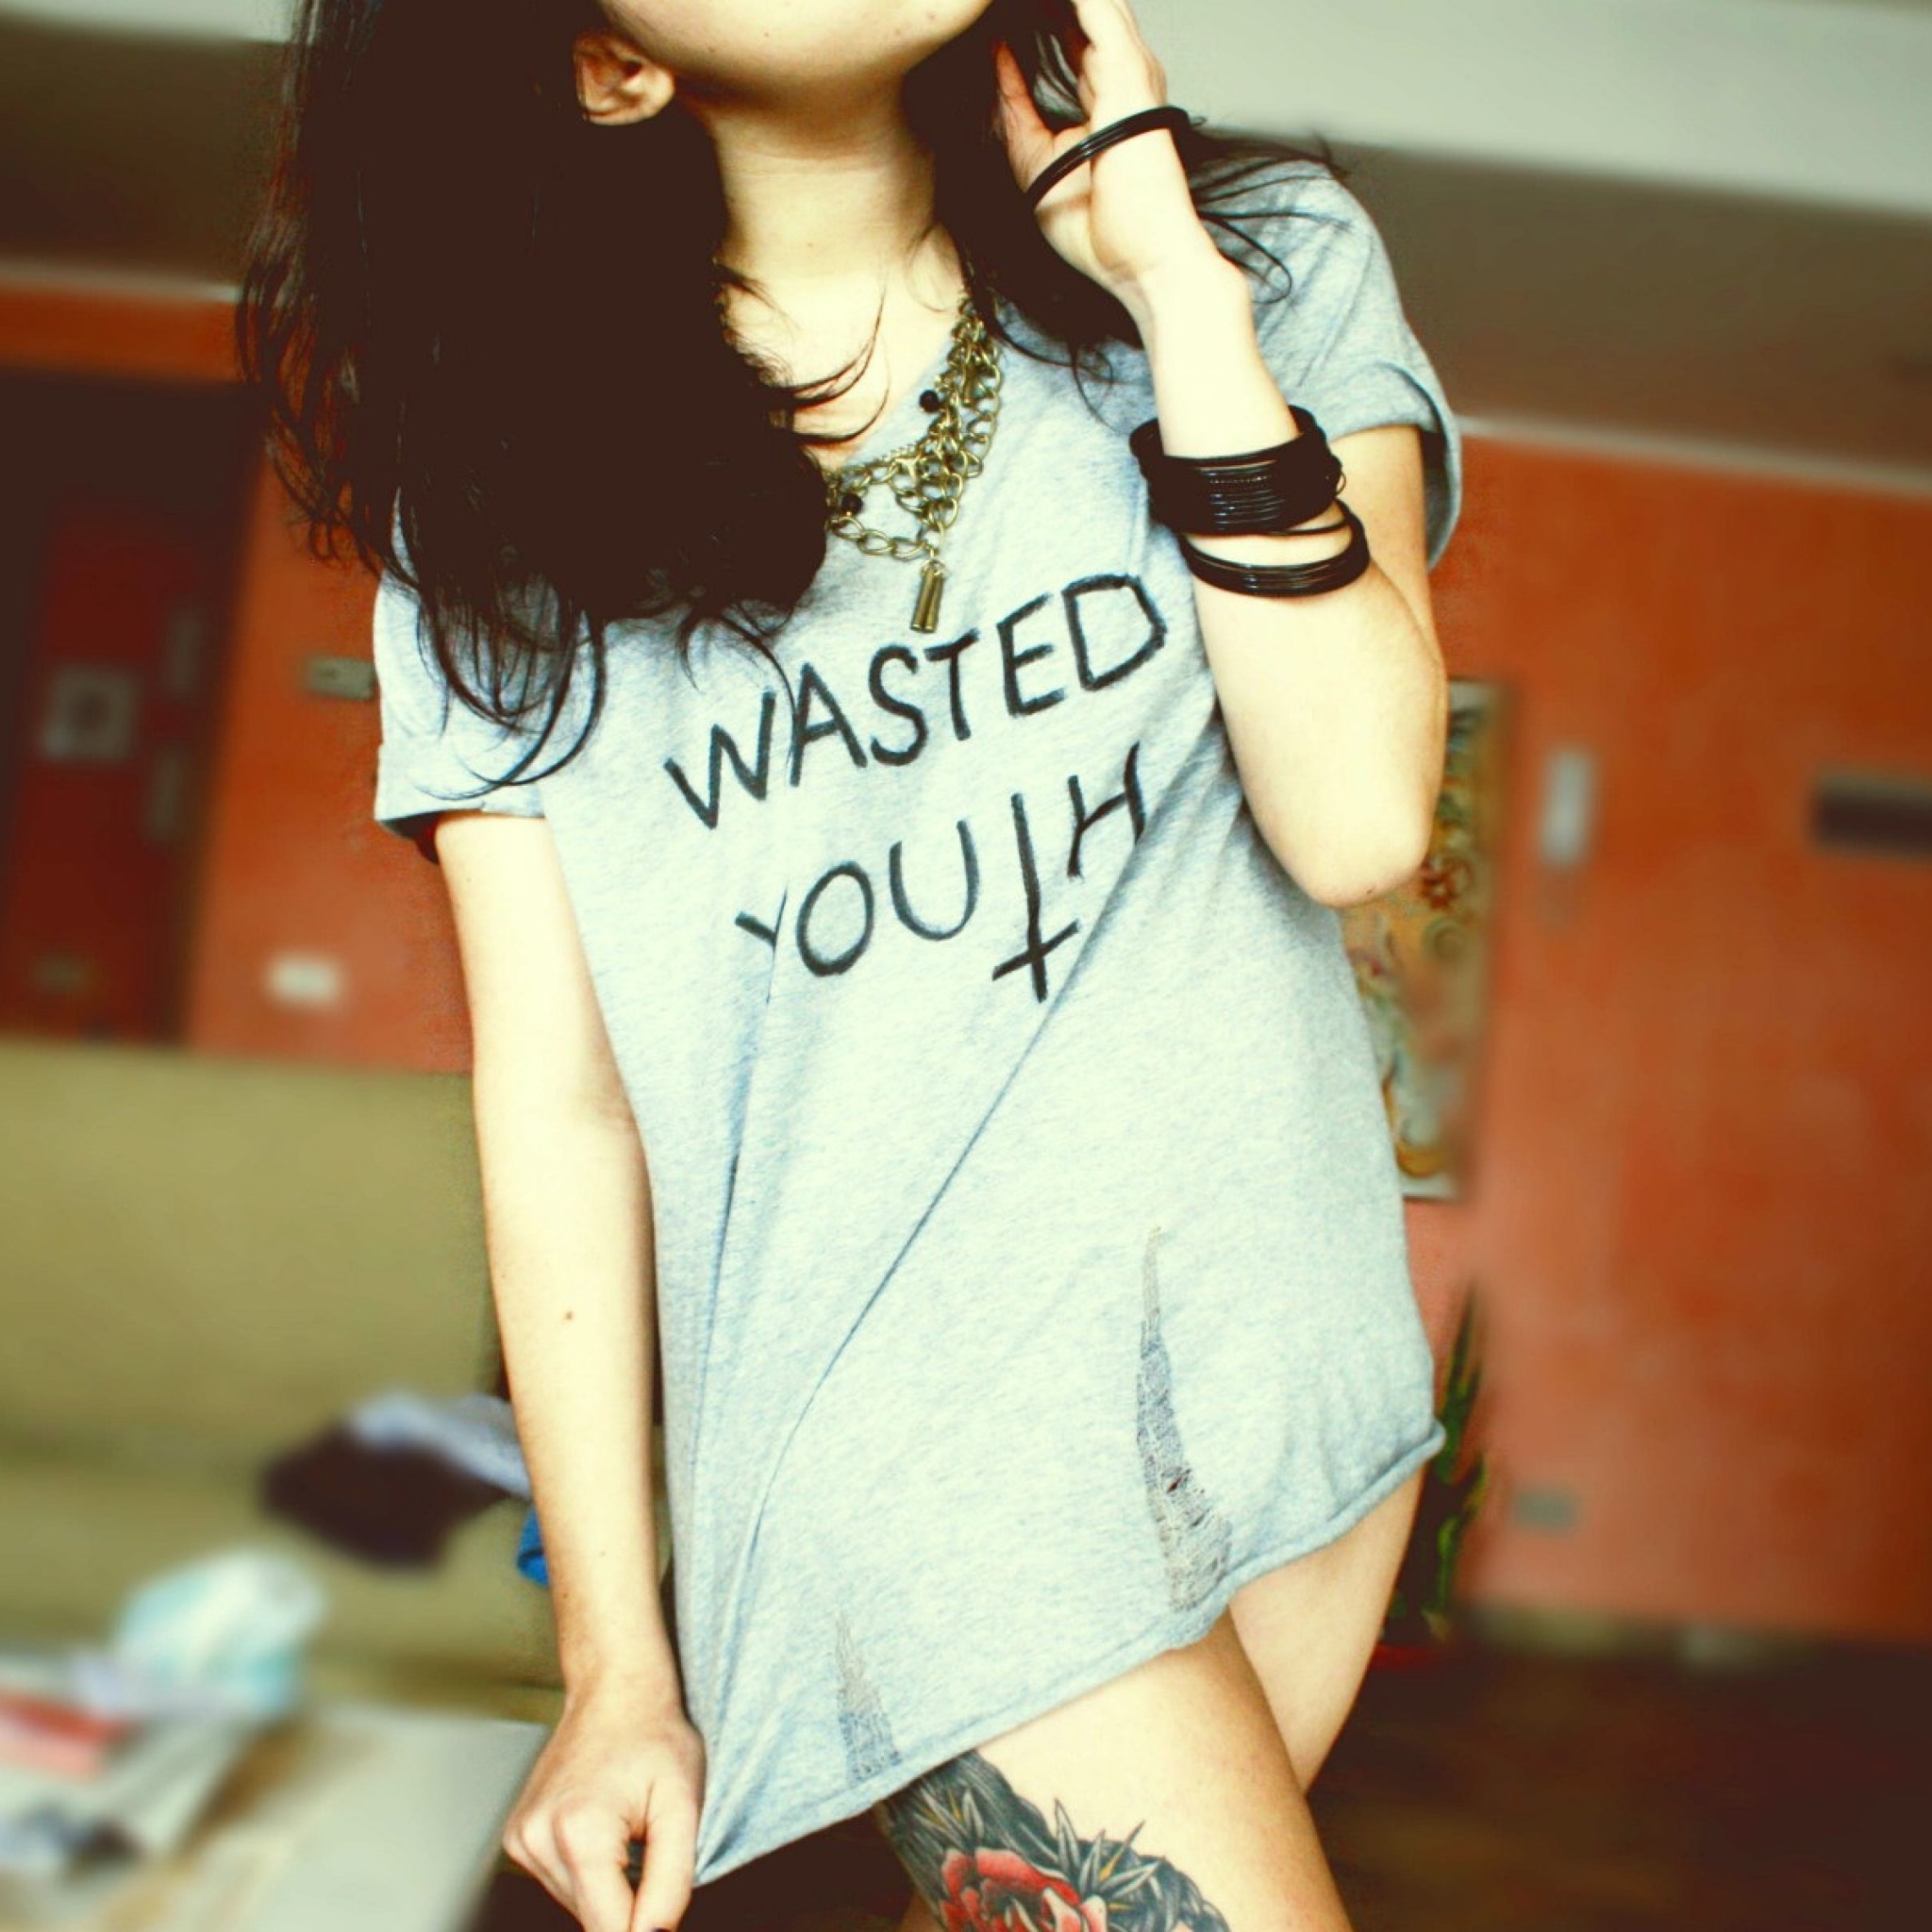 Das Wasted Youth T-Shirt Wallpaper 2048x2048